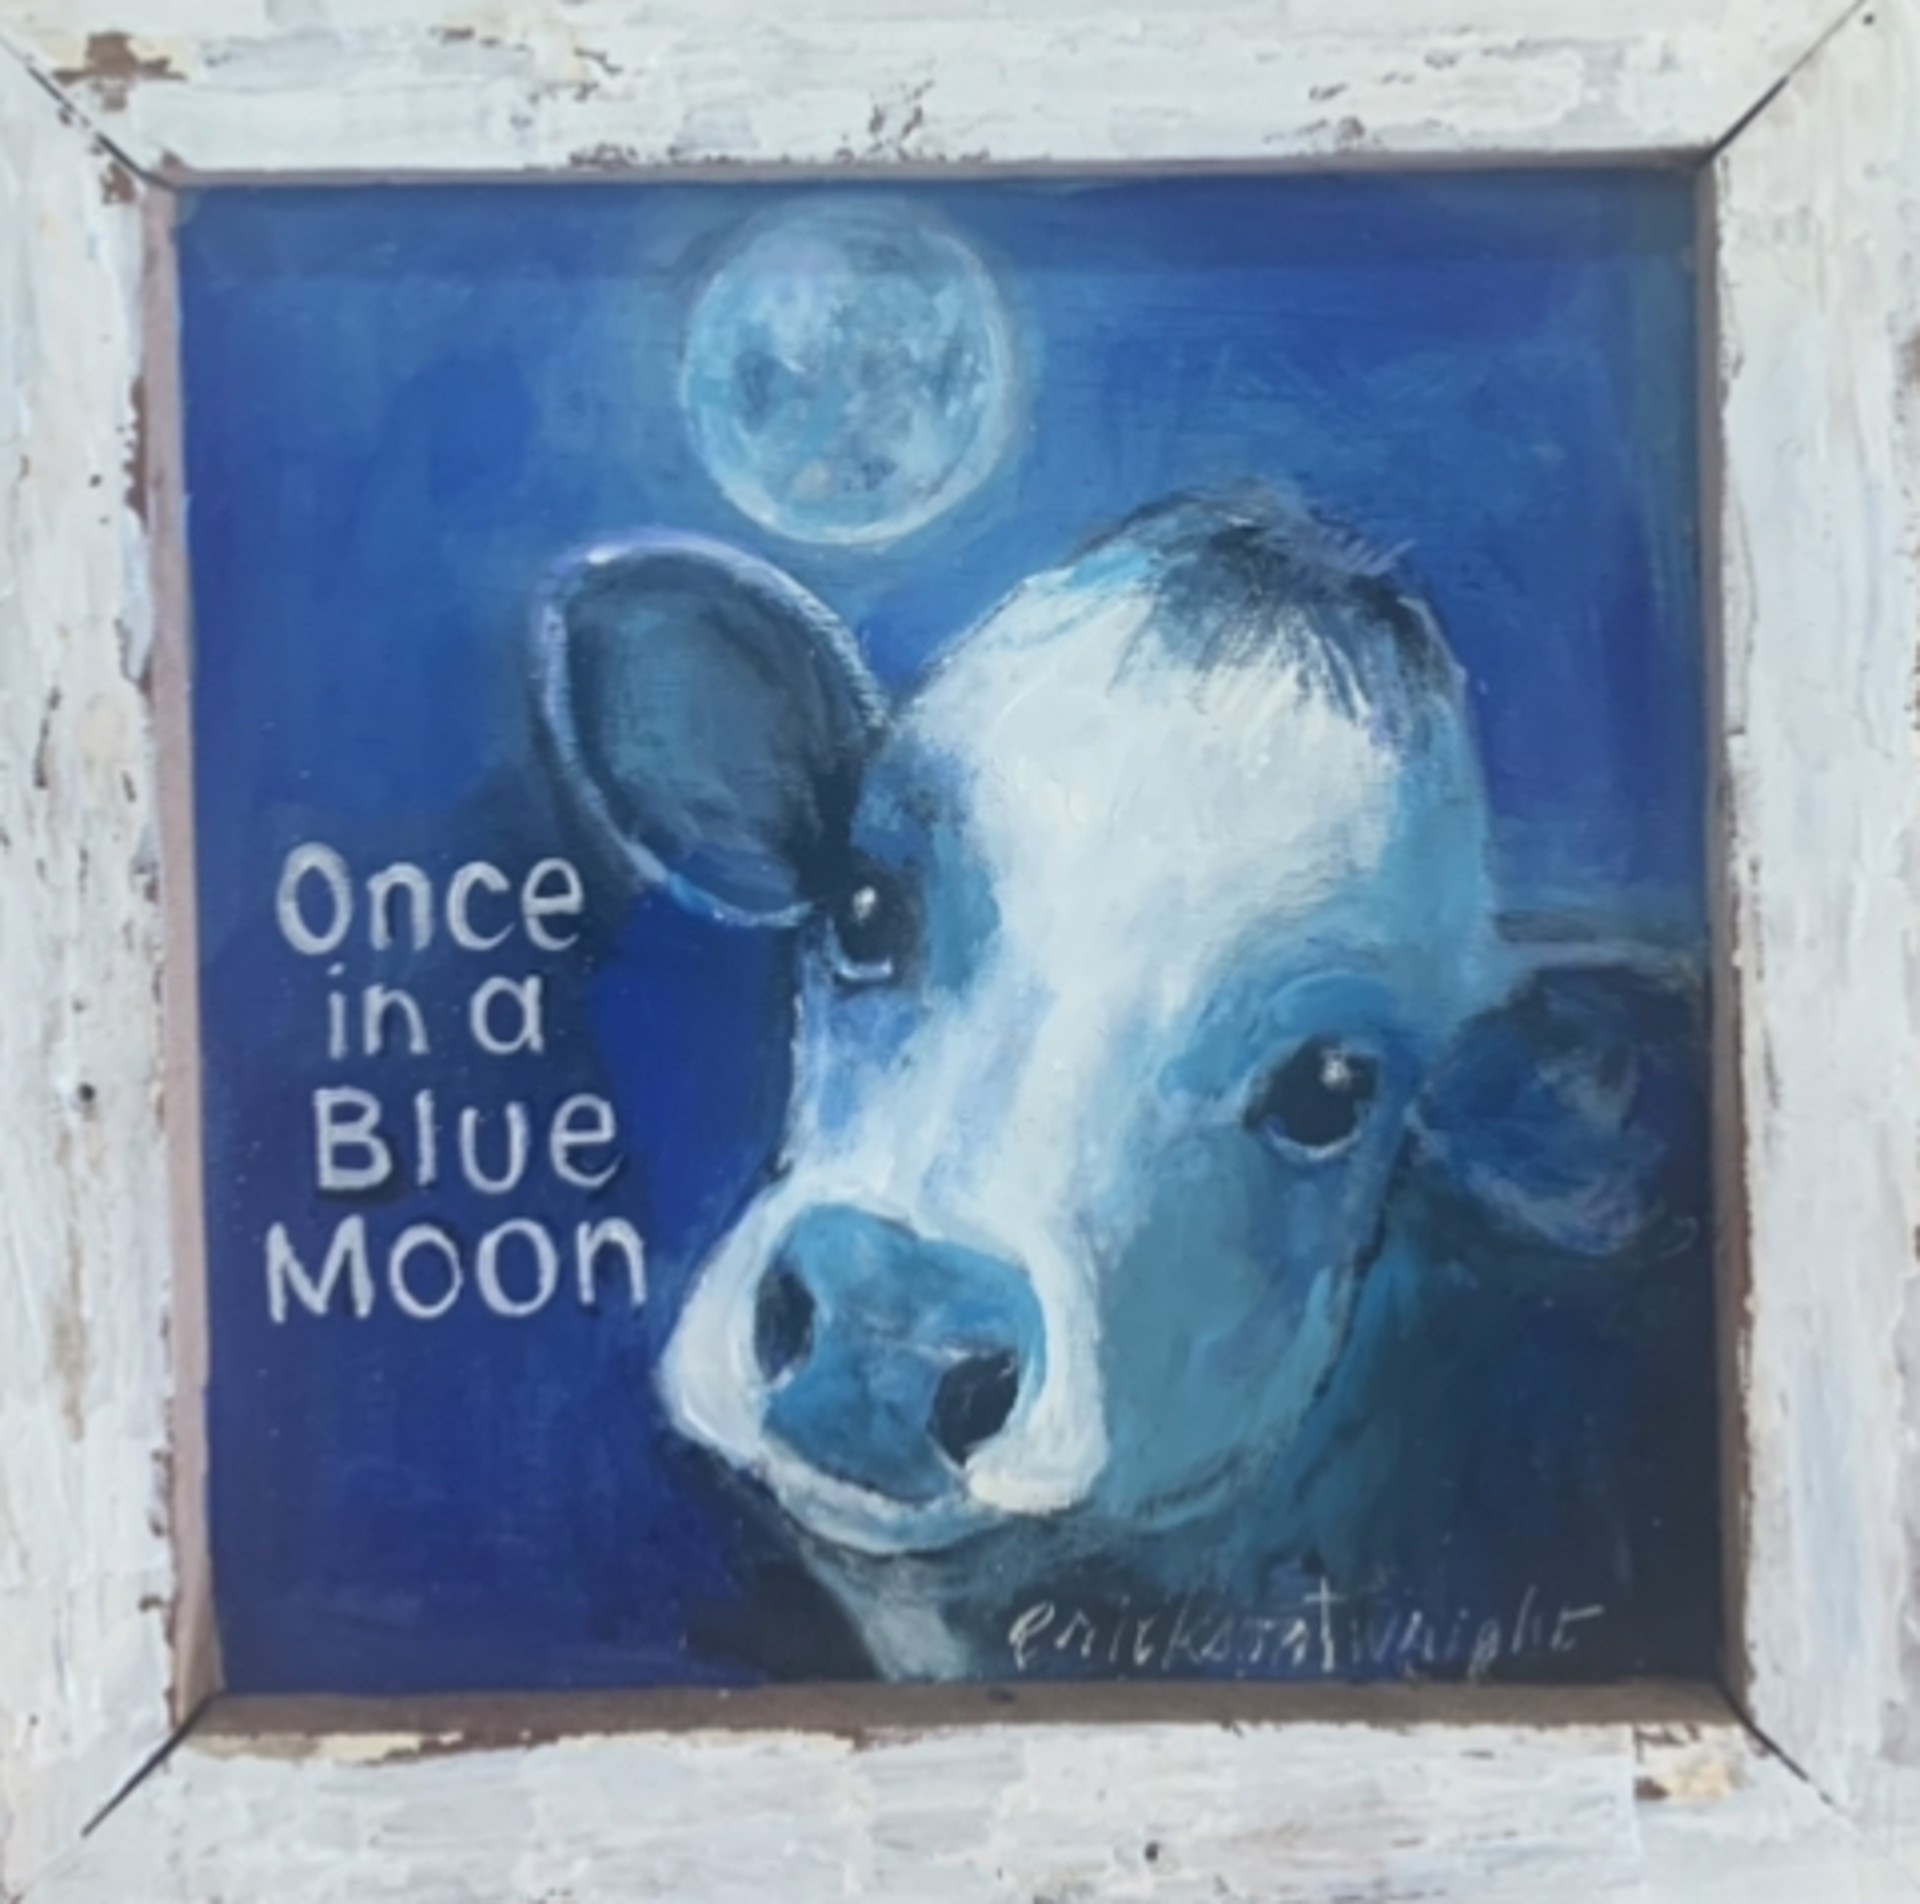 Once in a Blue Moon by Sandra Erickson Wright